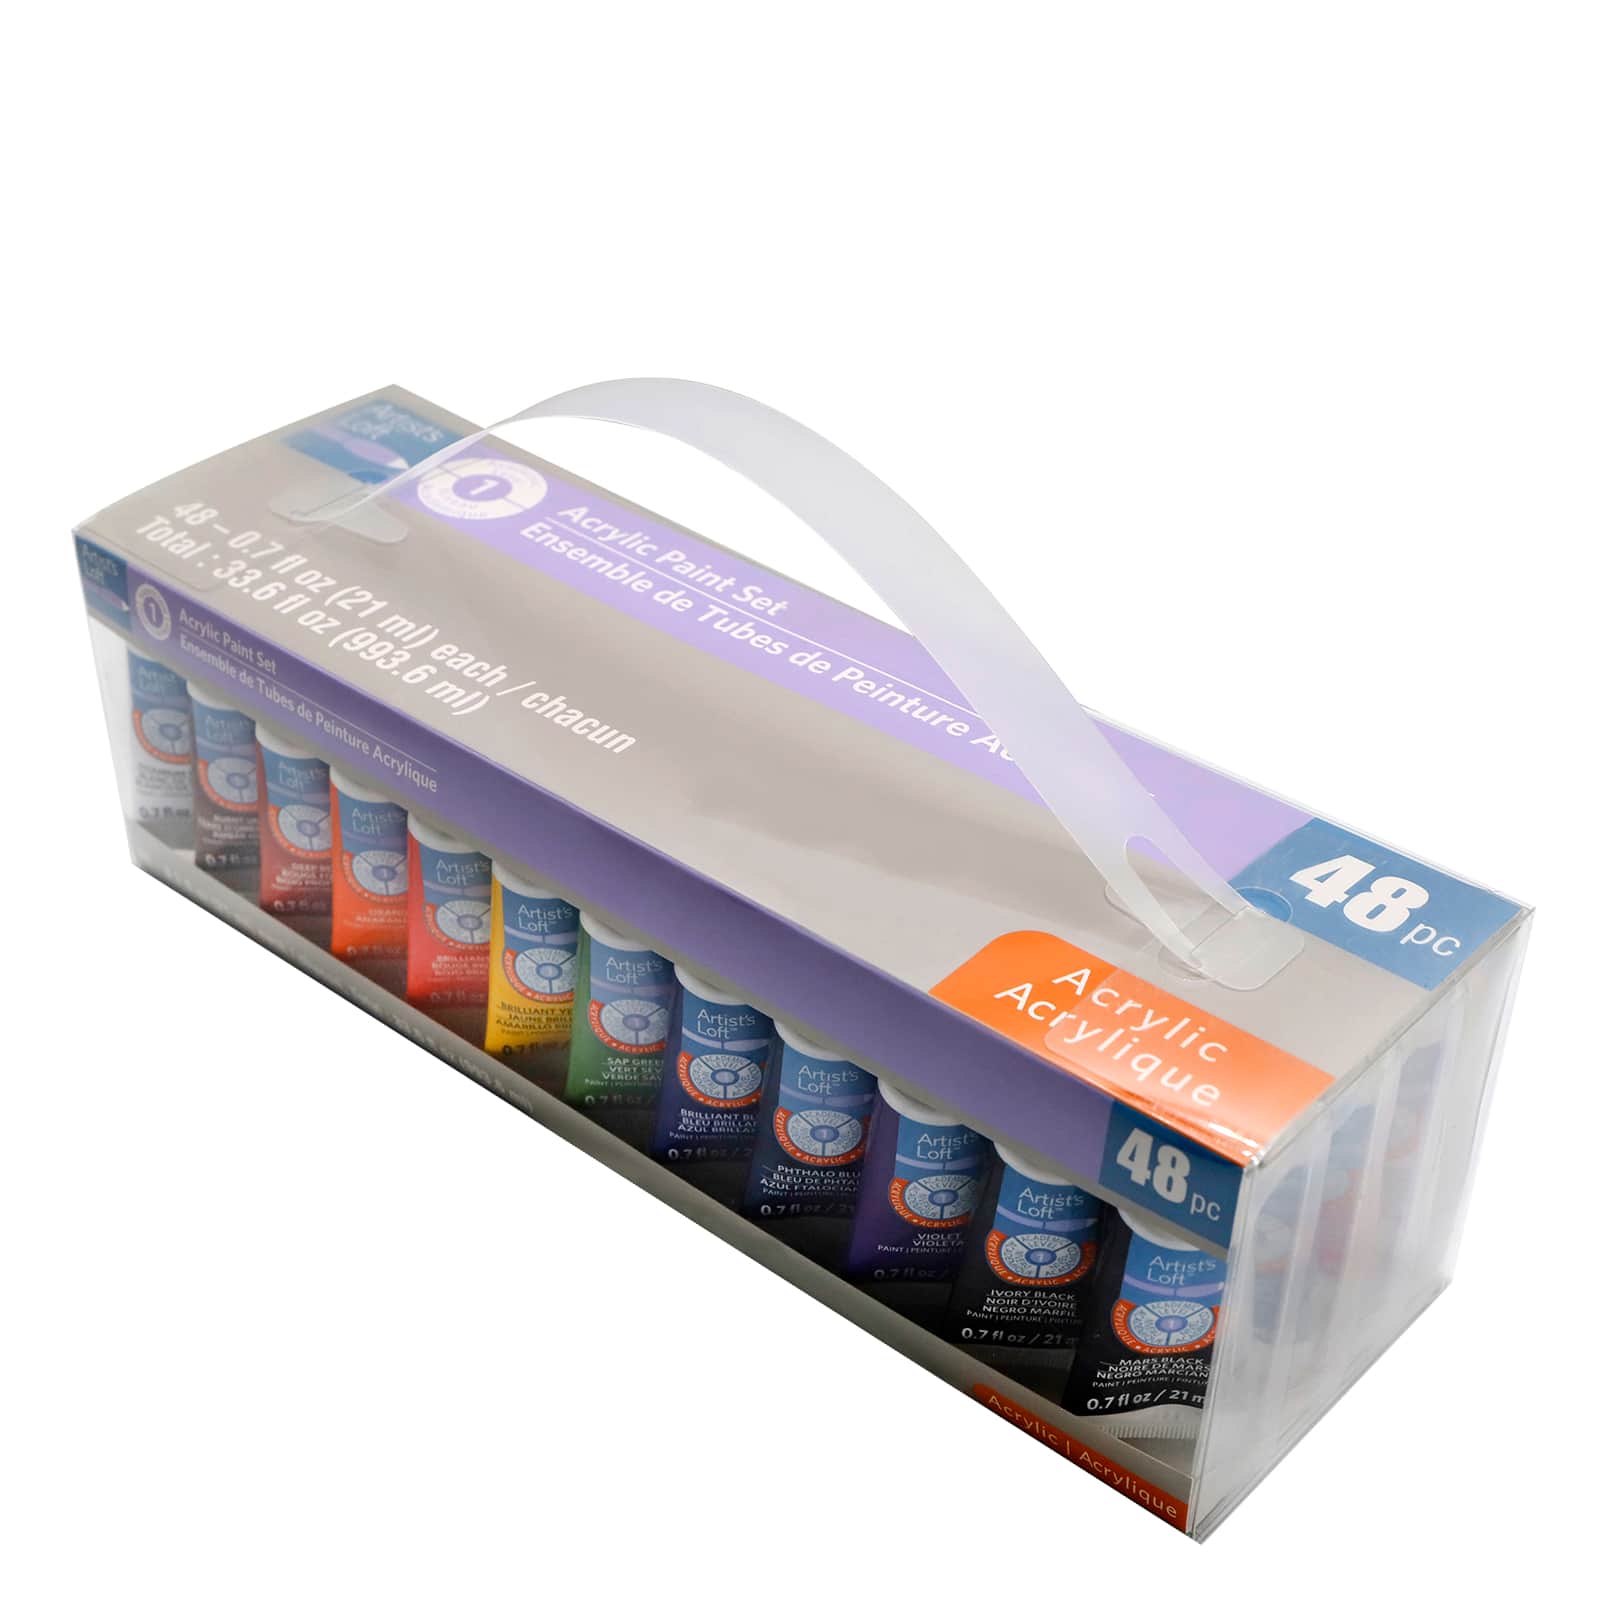 Level 1 Complete Acrylic Painting Set by Artist's Loft™